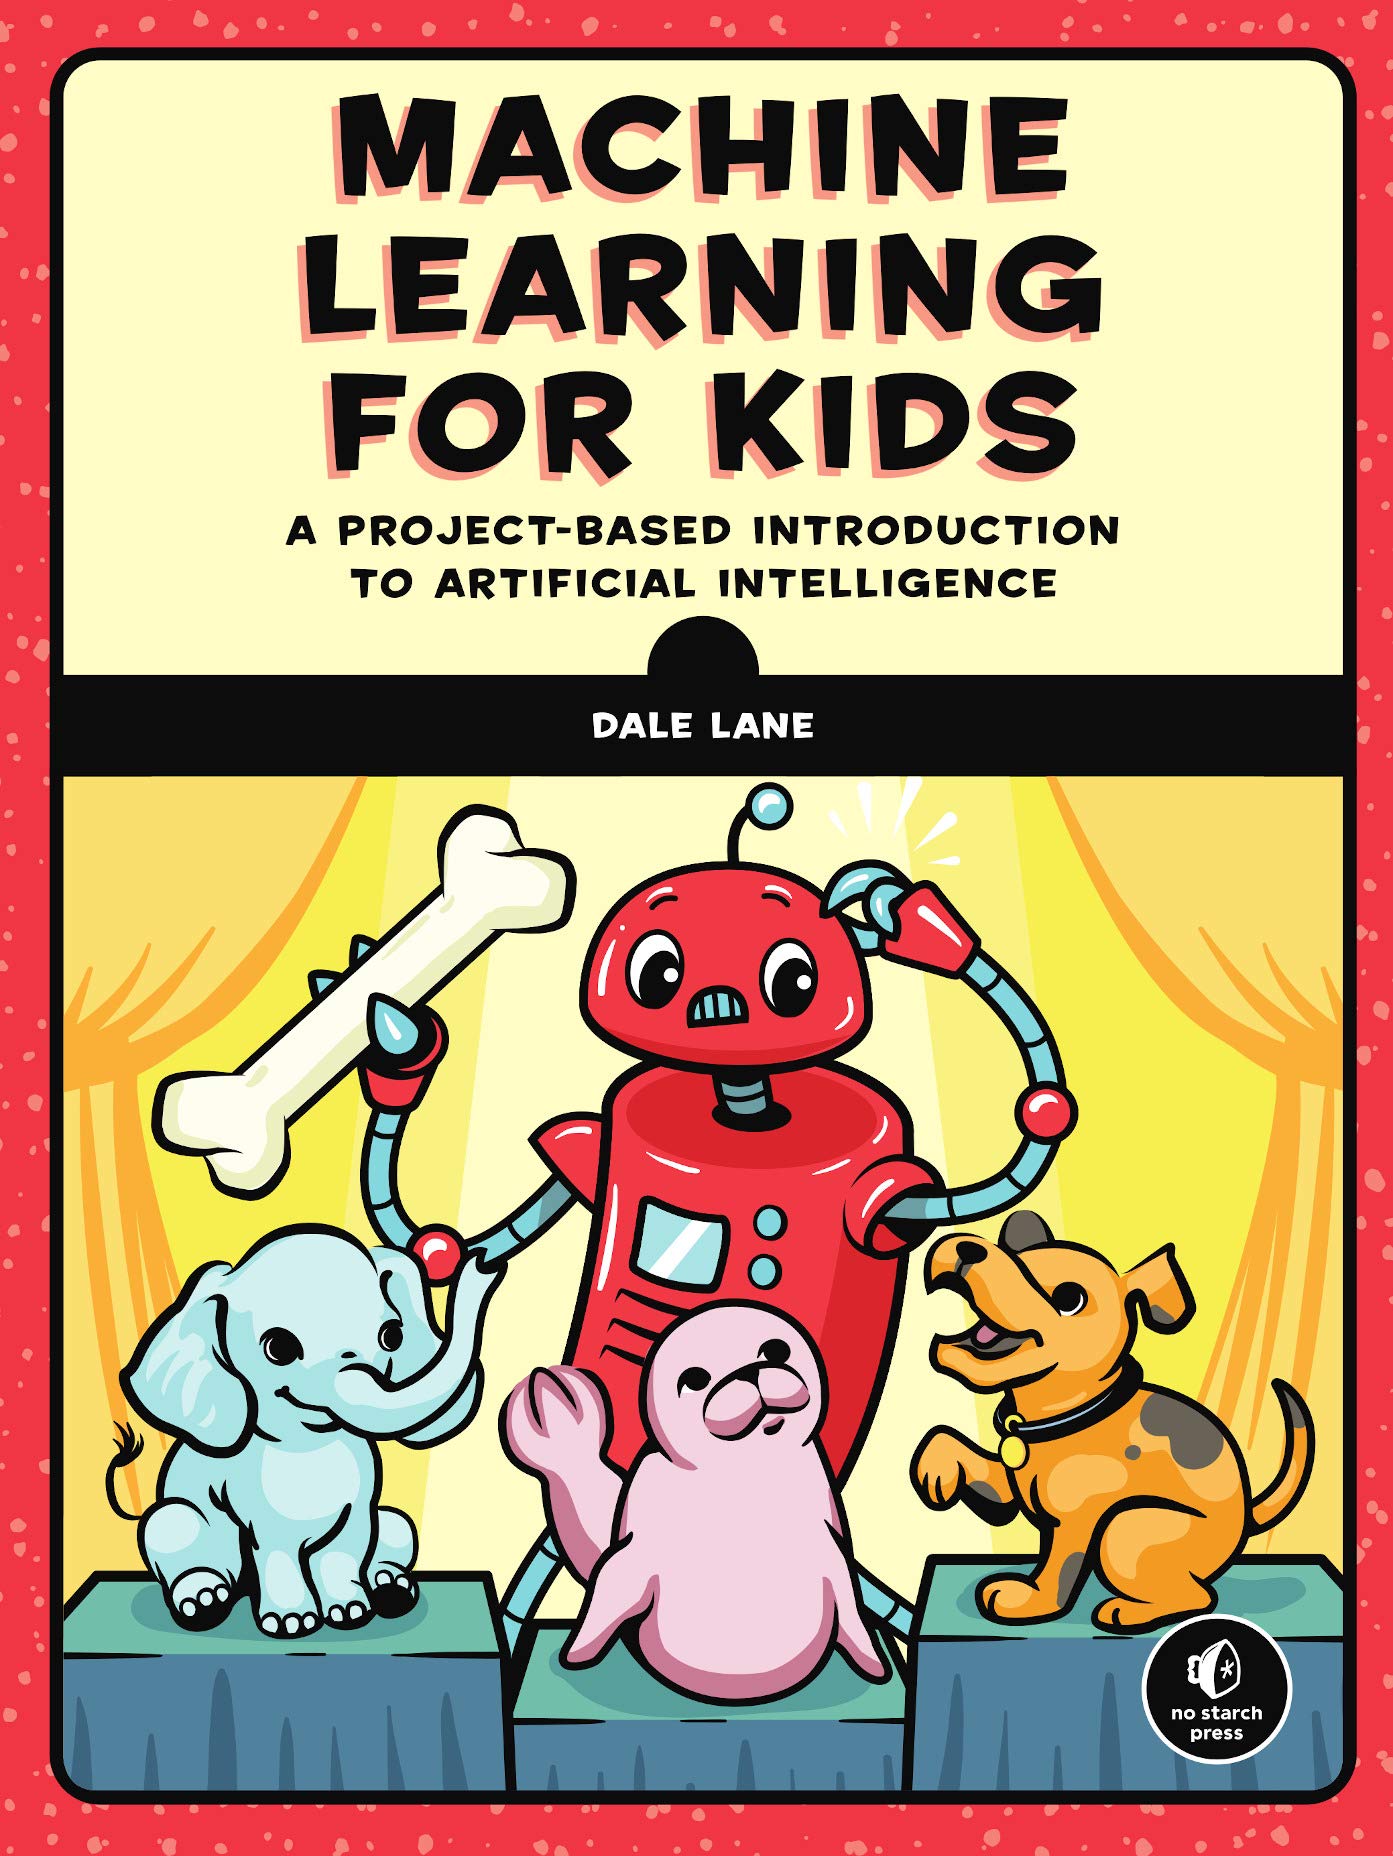  Machine Learning for Kids by Dale Lane. 